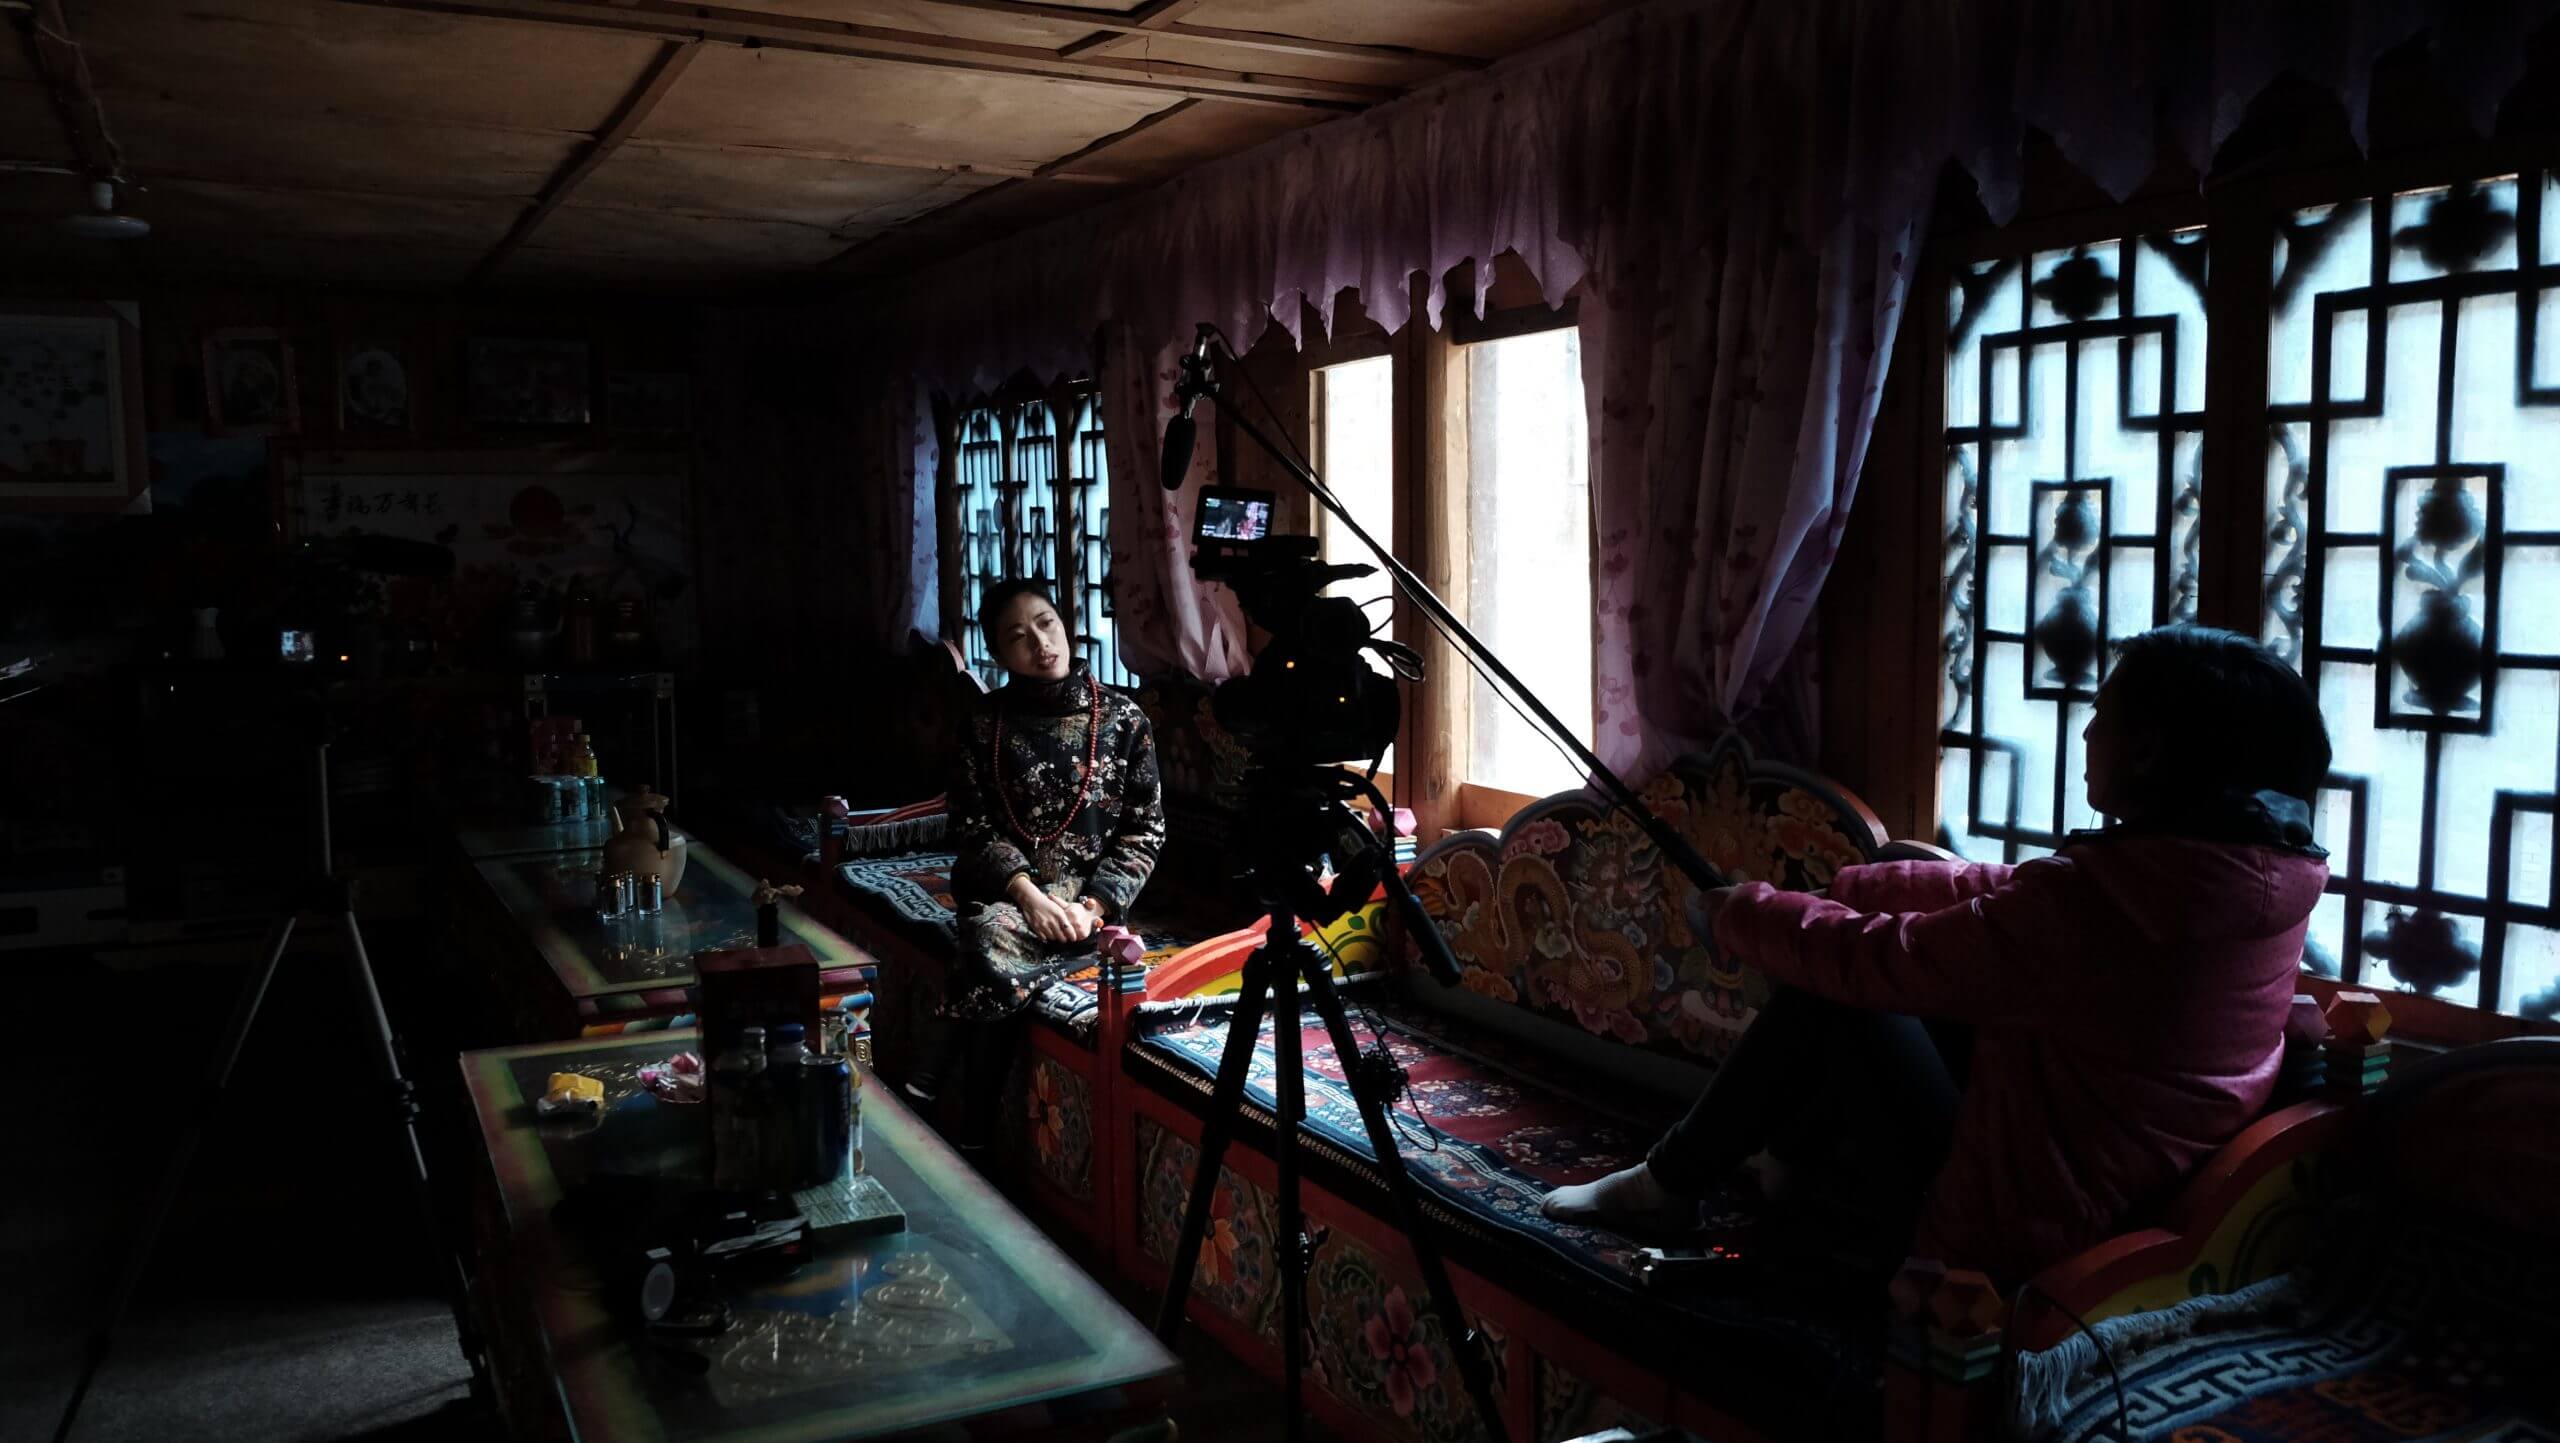 A young Tibetan woman is being interviewed in her home. The filmmaker holds the boom pole and the camera is visible in the foreground.